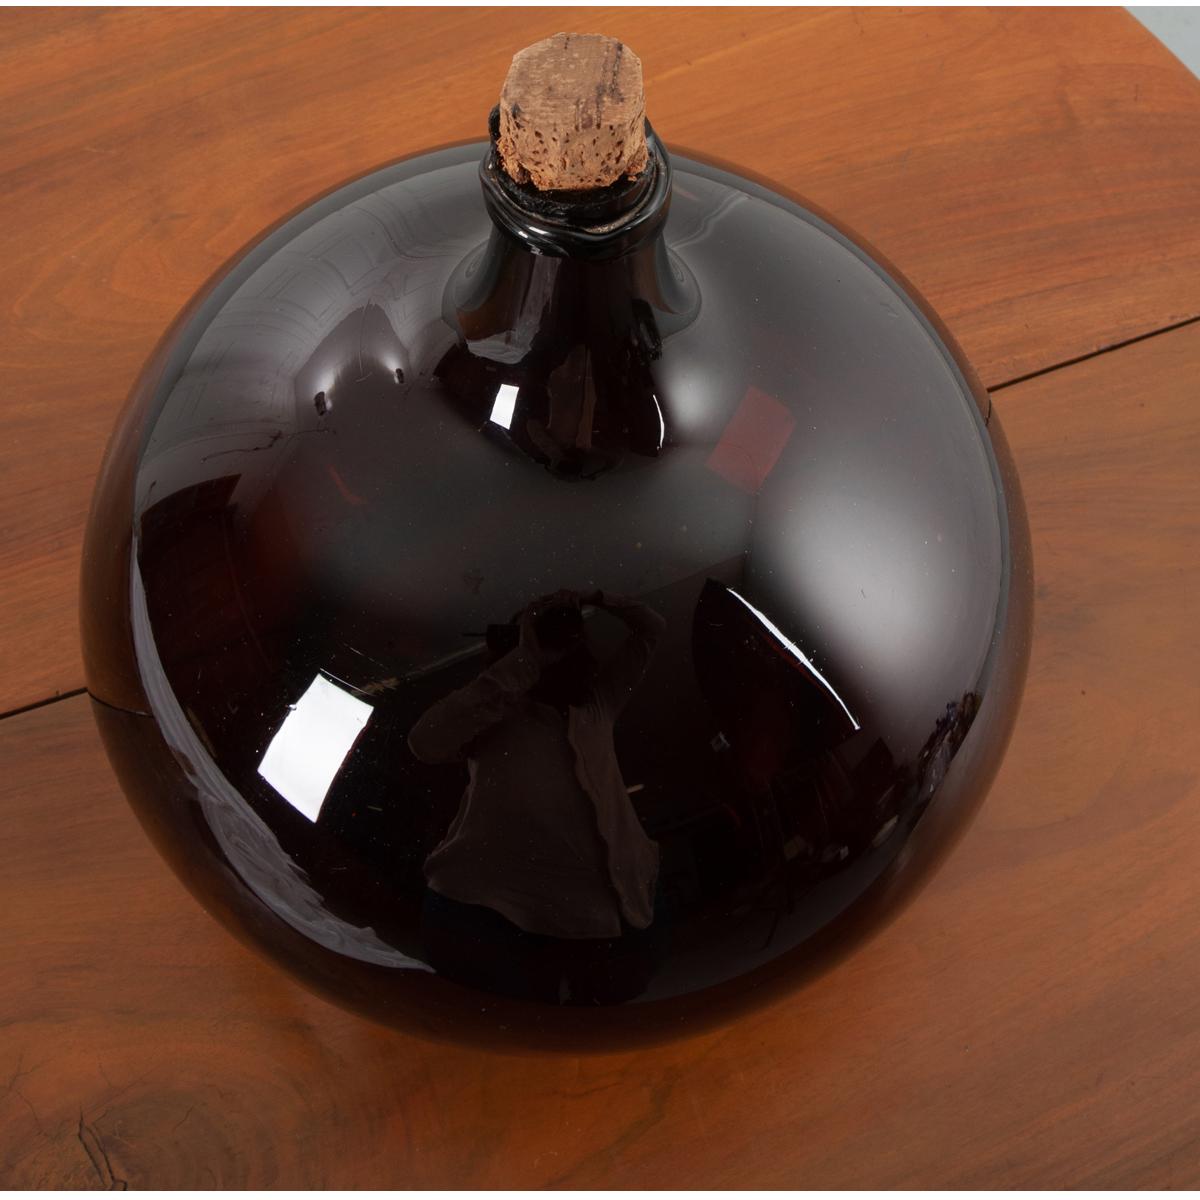 This beautiful, amber blown glass wine keg, or demijohn as they are sometimes called, remains fully intact. Still in wonderful condition, this piece would be a great addition to your space, giving it an element of texture and color. They make